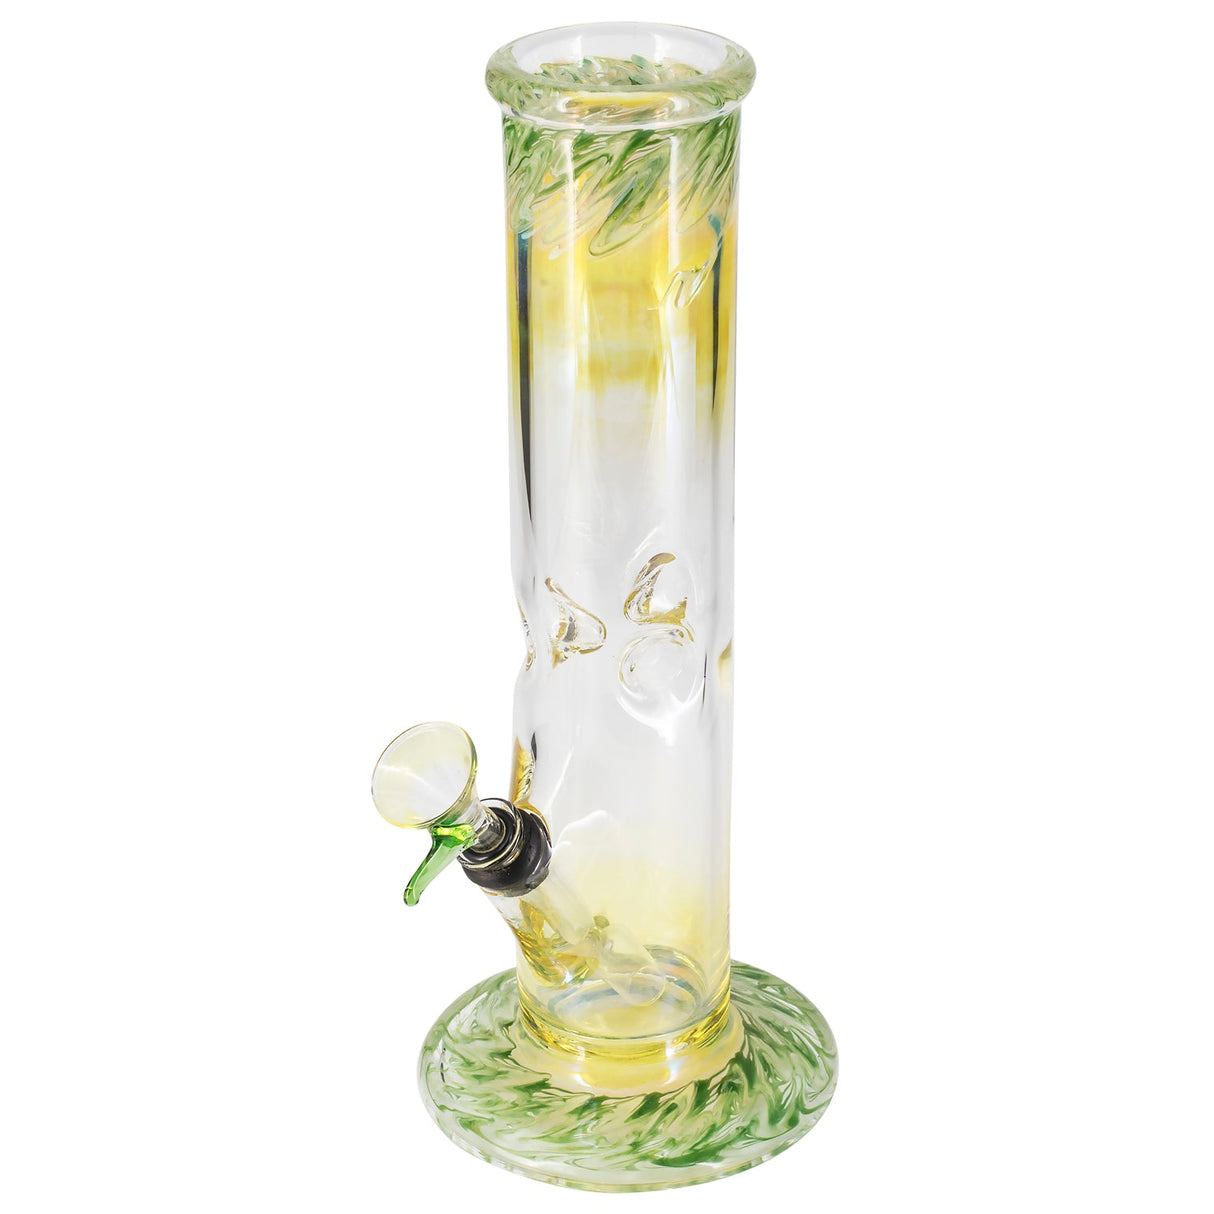 LA Pipes "The Chong-Bong" Classic Straight Bong, 10" height, Borosilicate Glass, USA-made, front view